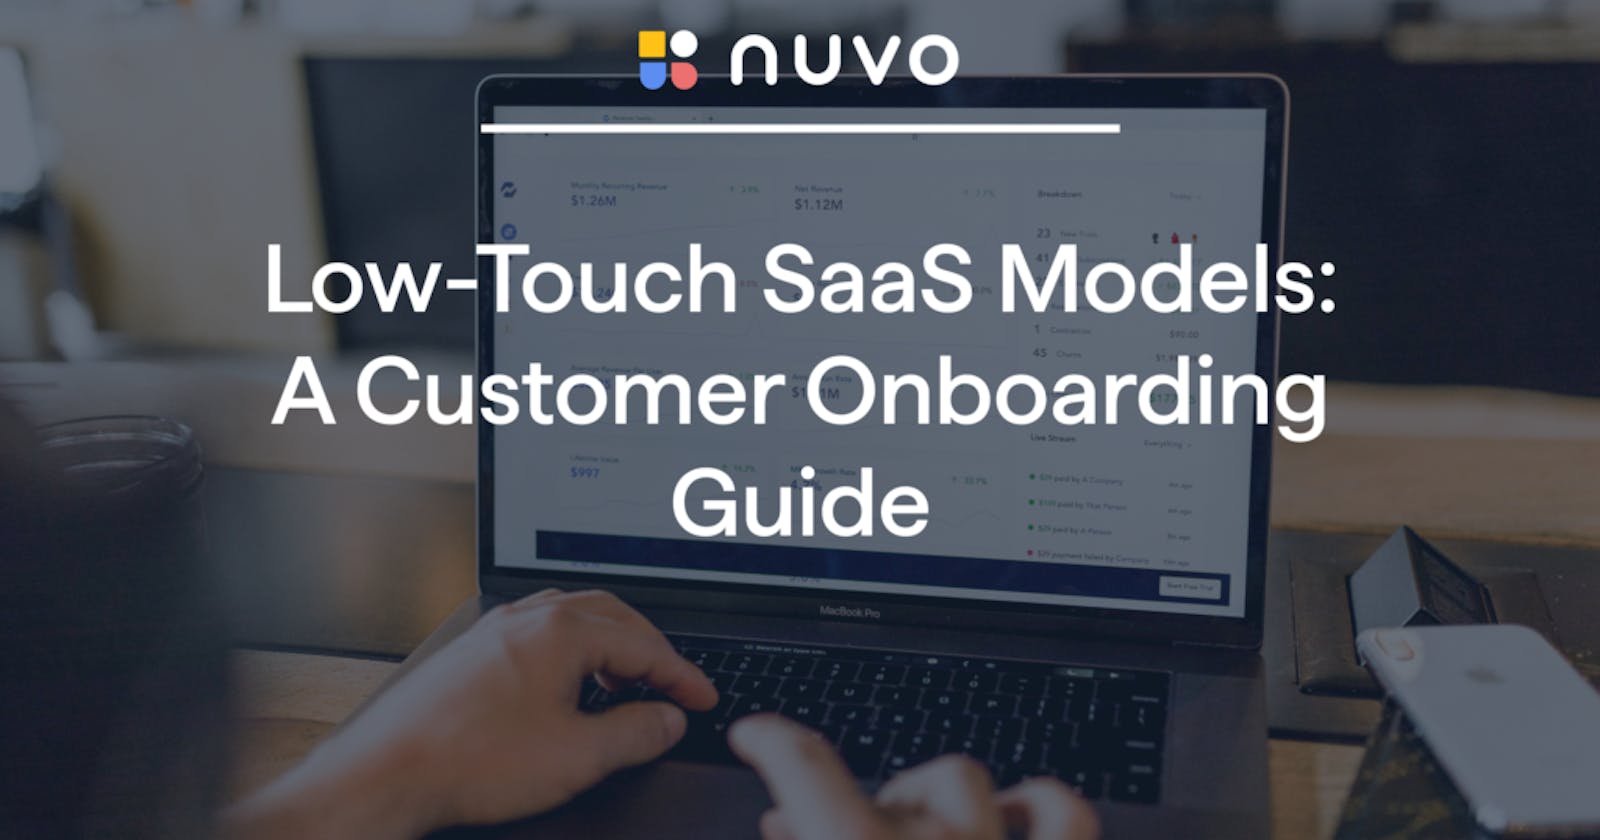 Low-Touch SaaS Models: A Customer Onboarding Guide